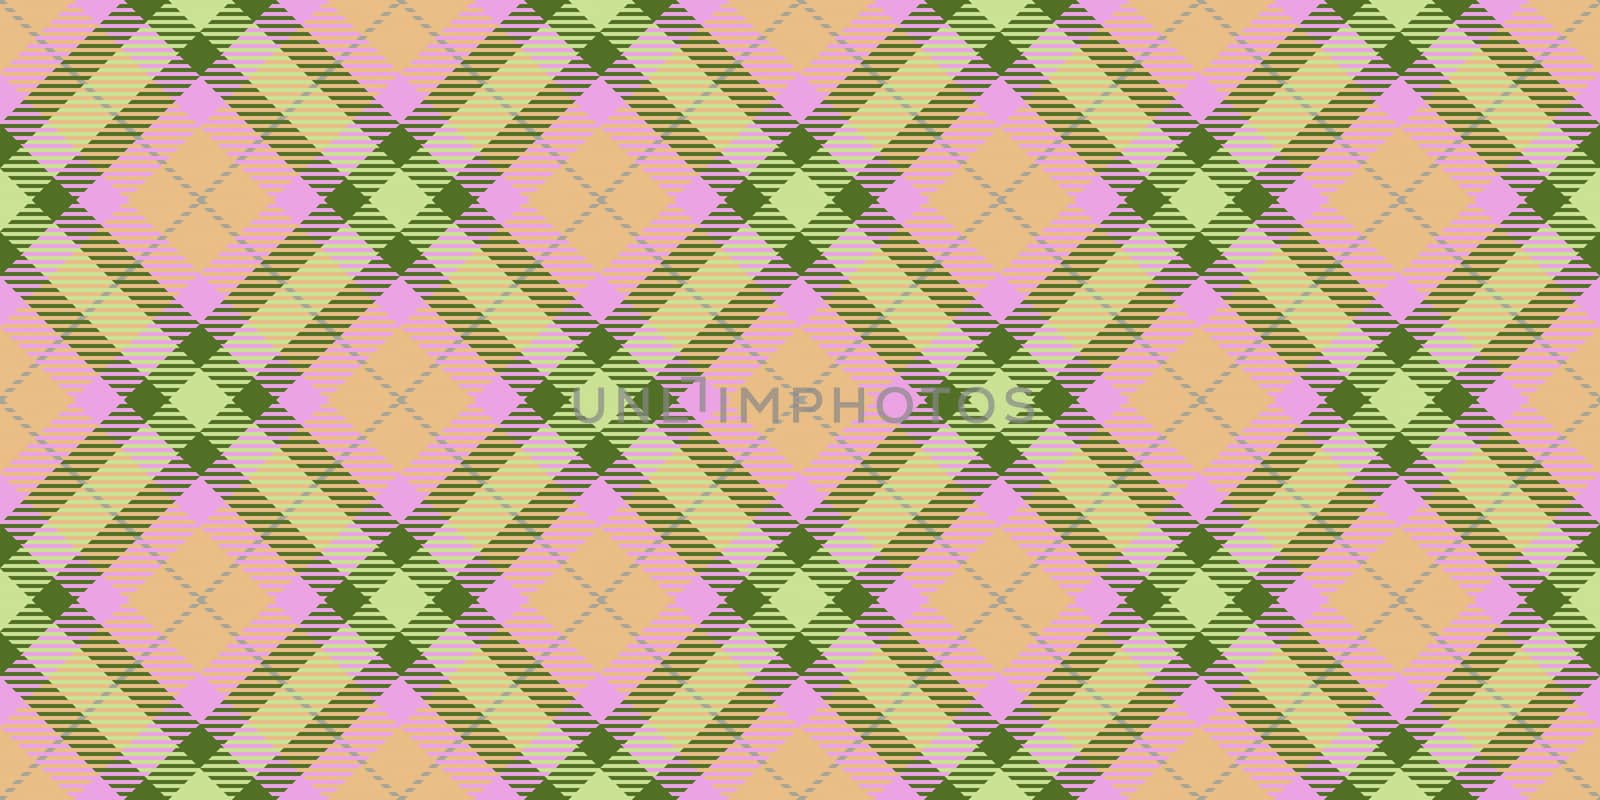 Beige Lime Seamless Checkered Rhombuses Pattern. Plaid Rug Background. Tartan Texture. by sanches812